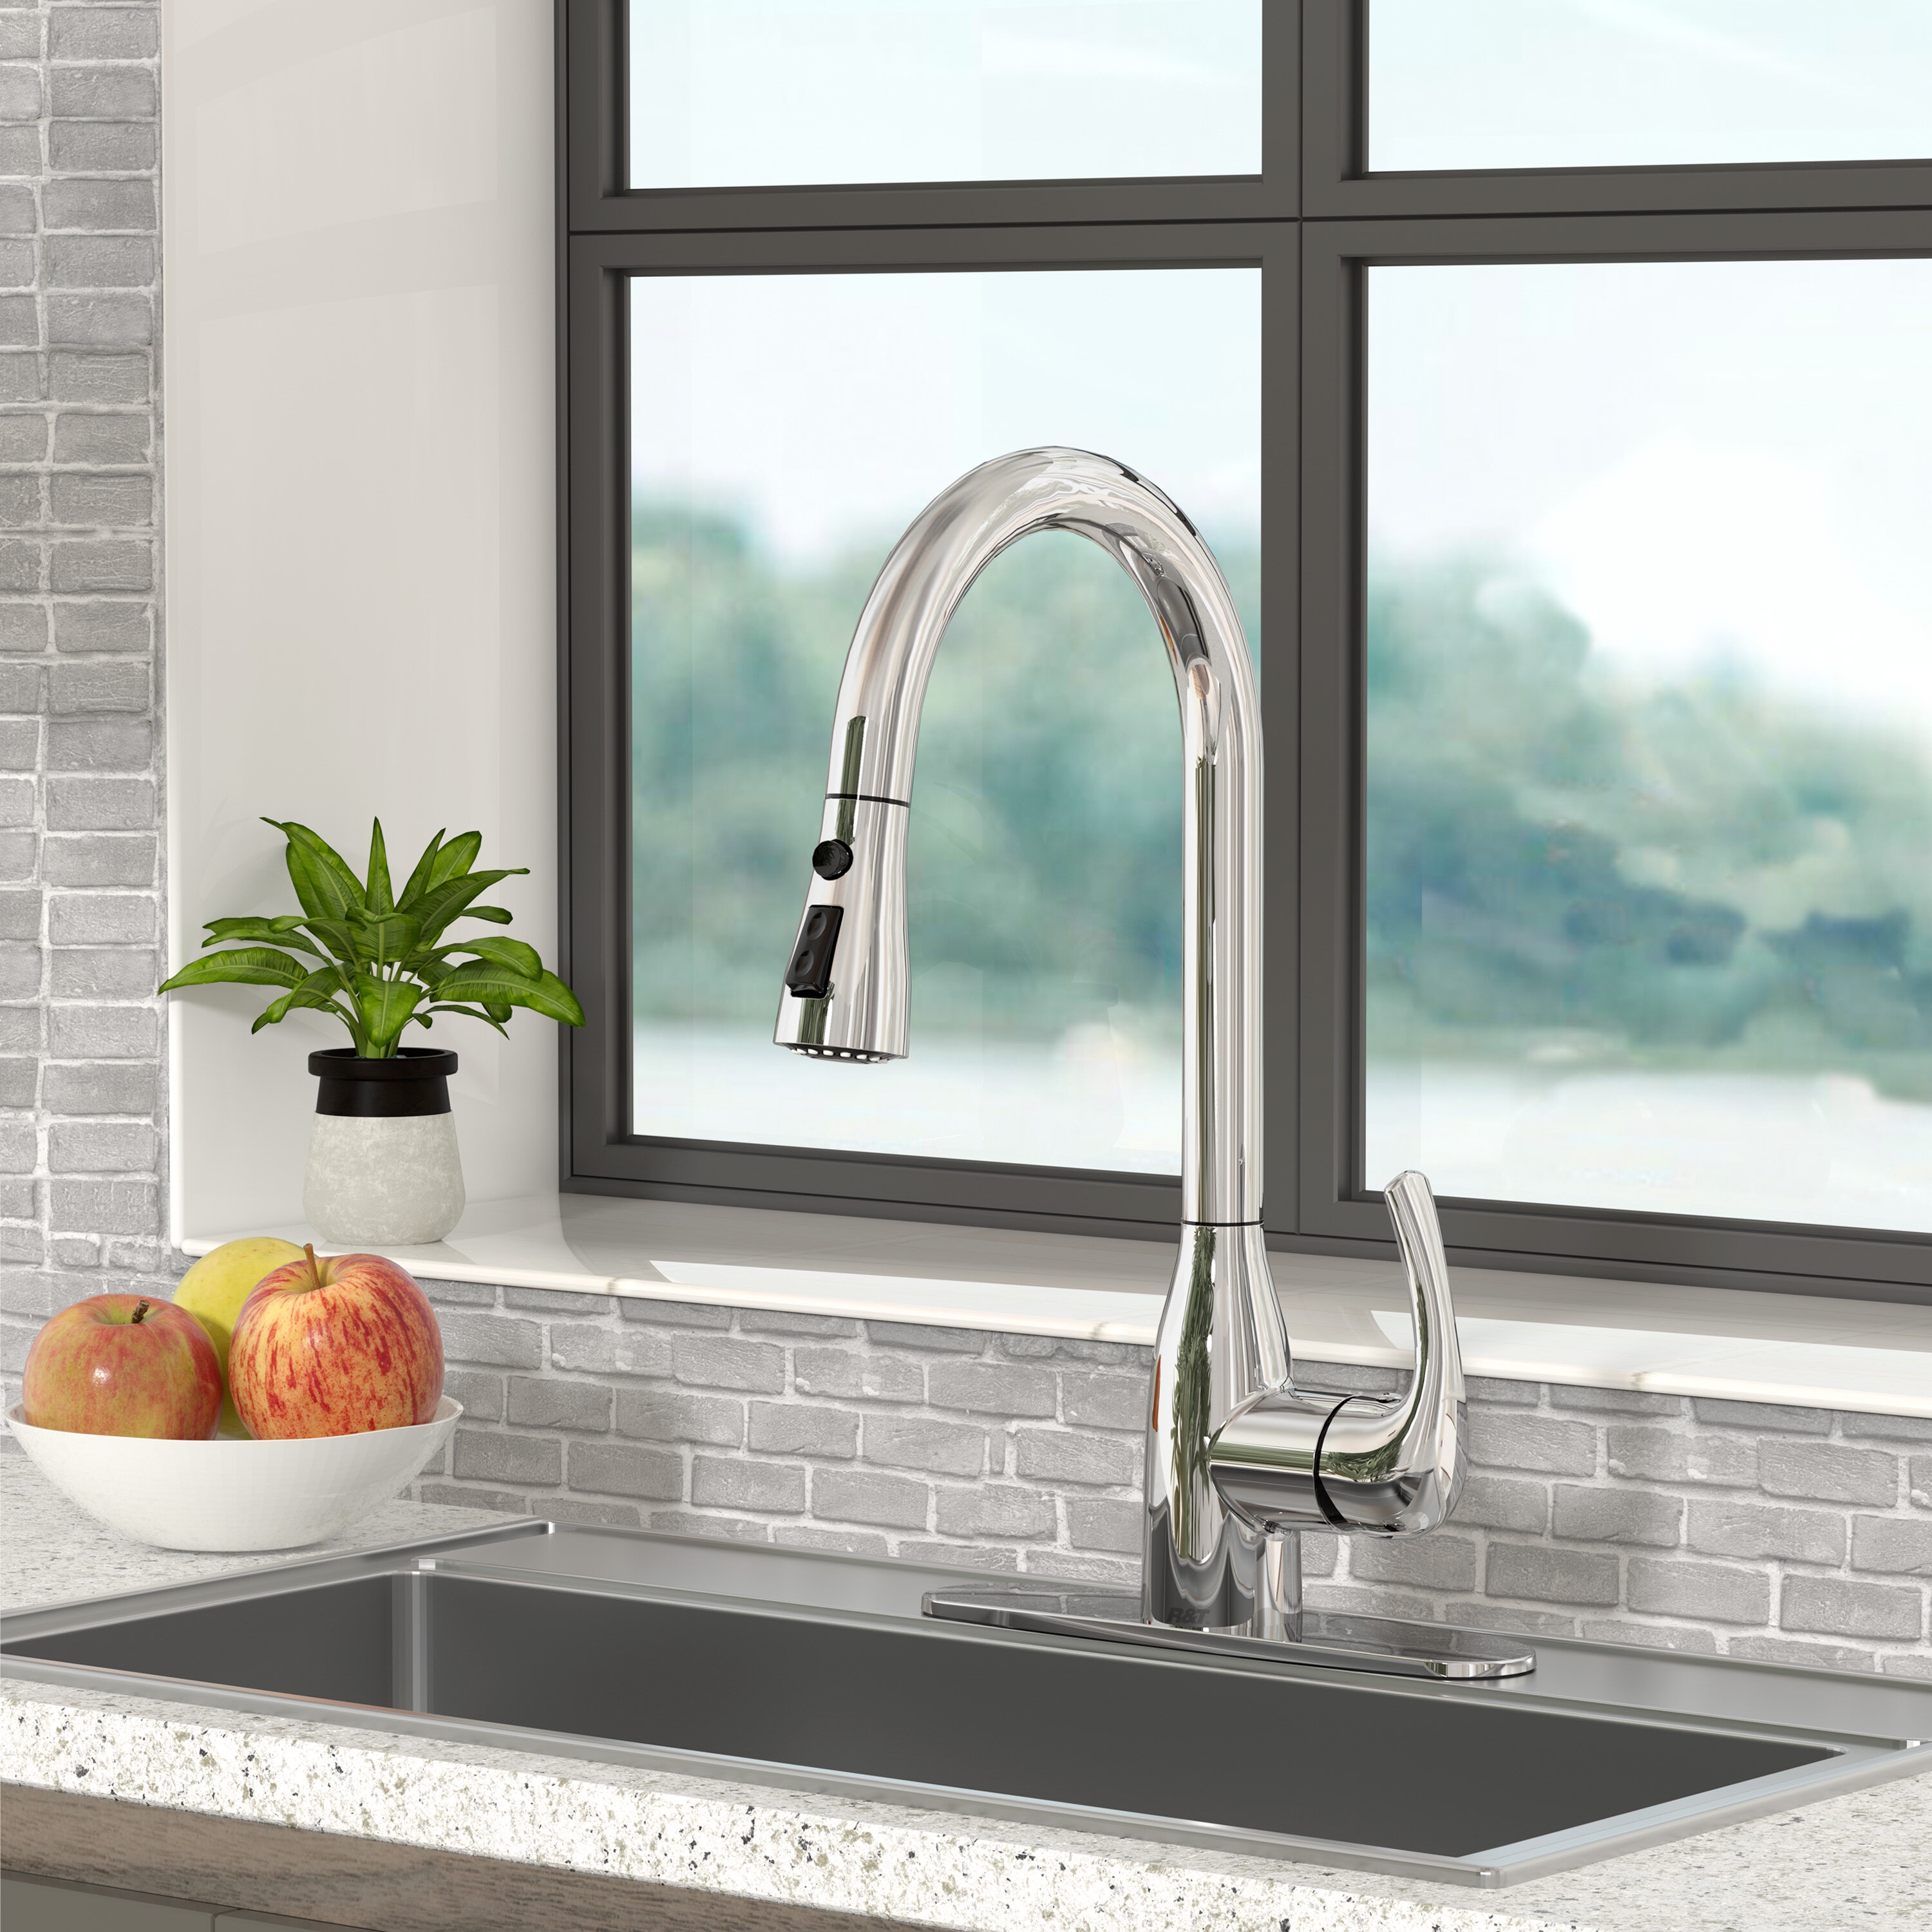 R&T Pull Down Kitchen Faucet